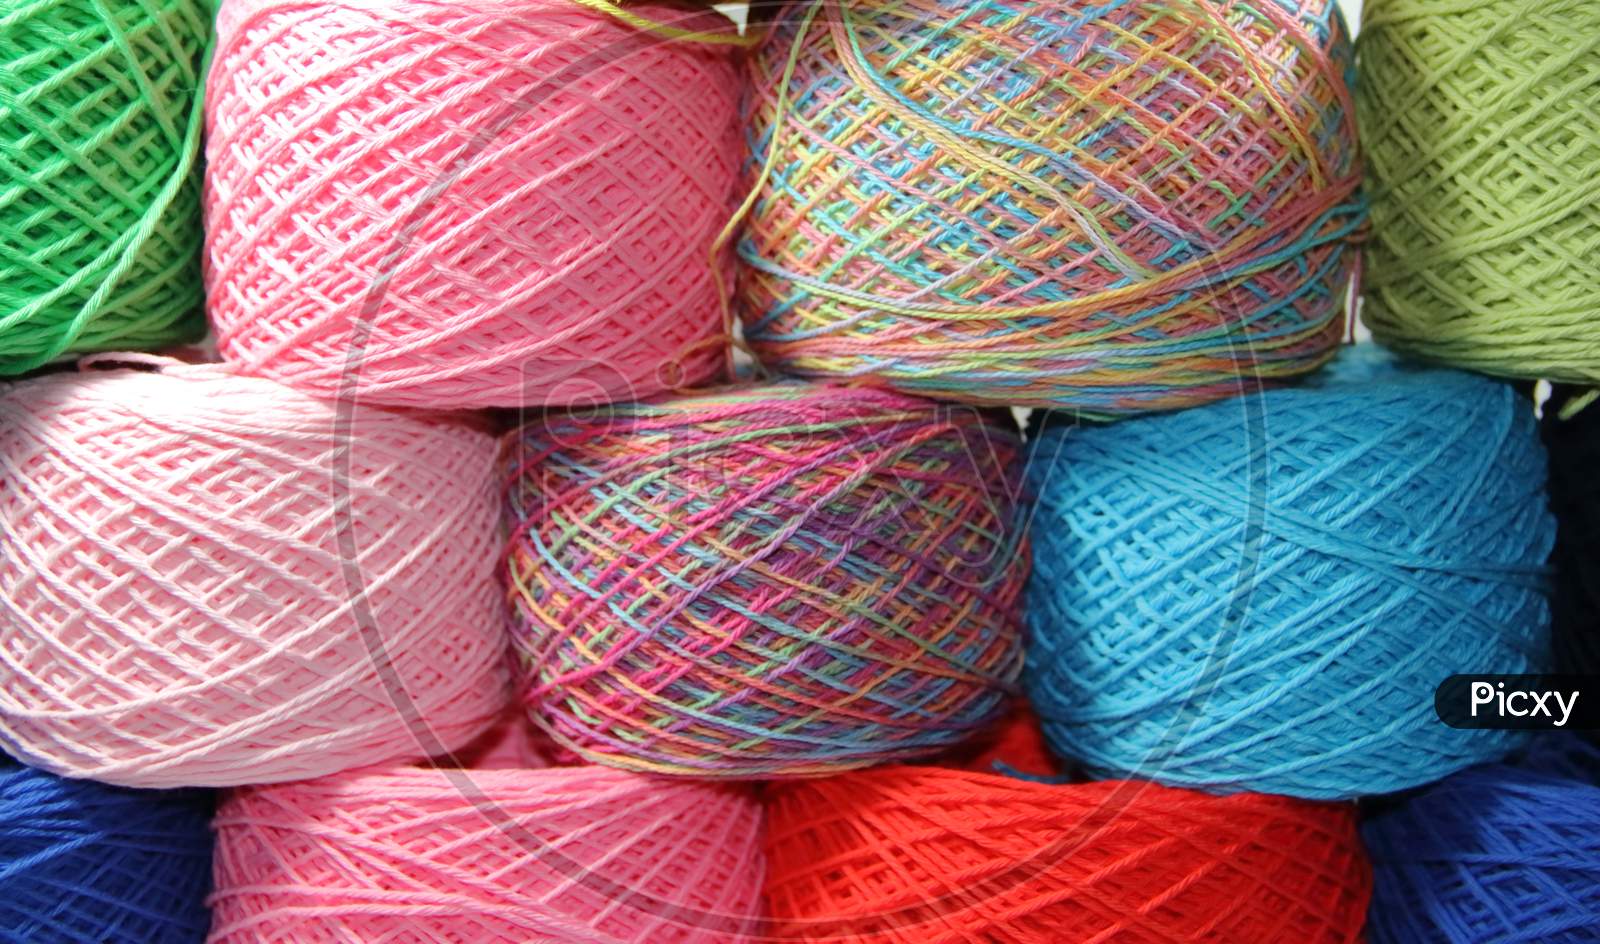 Yarn And Wool In Skeins And Yarns